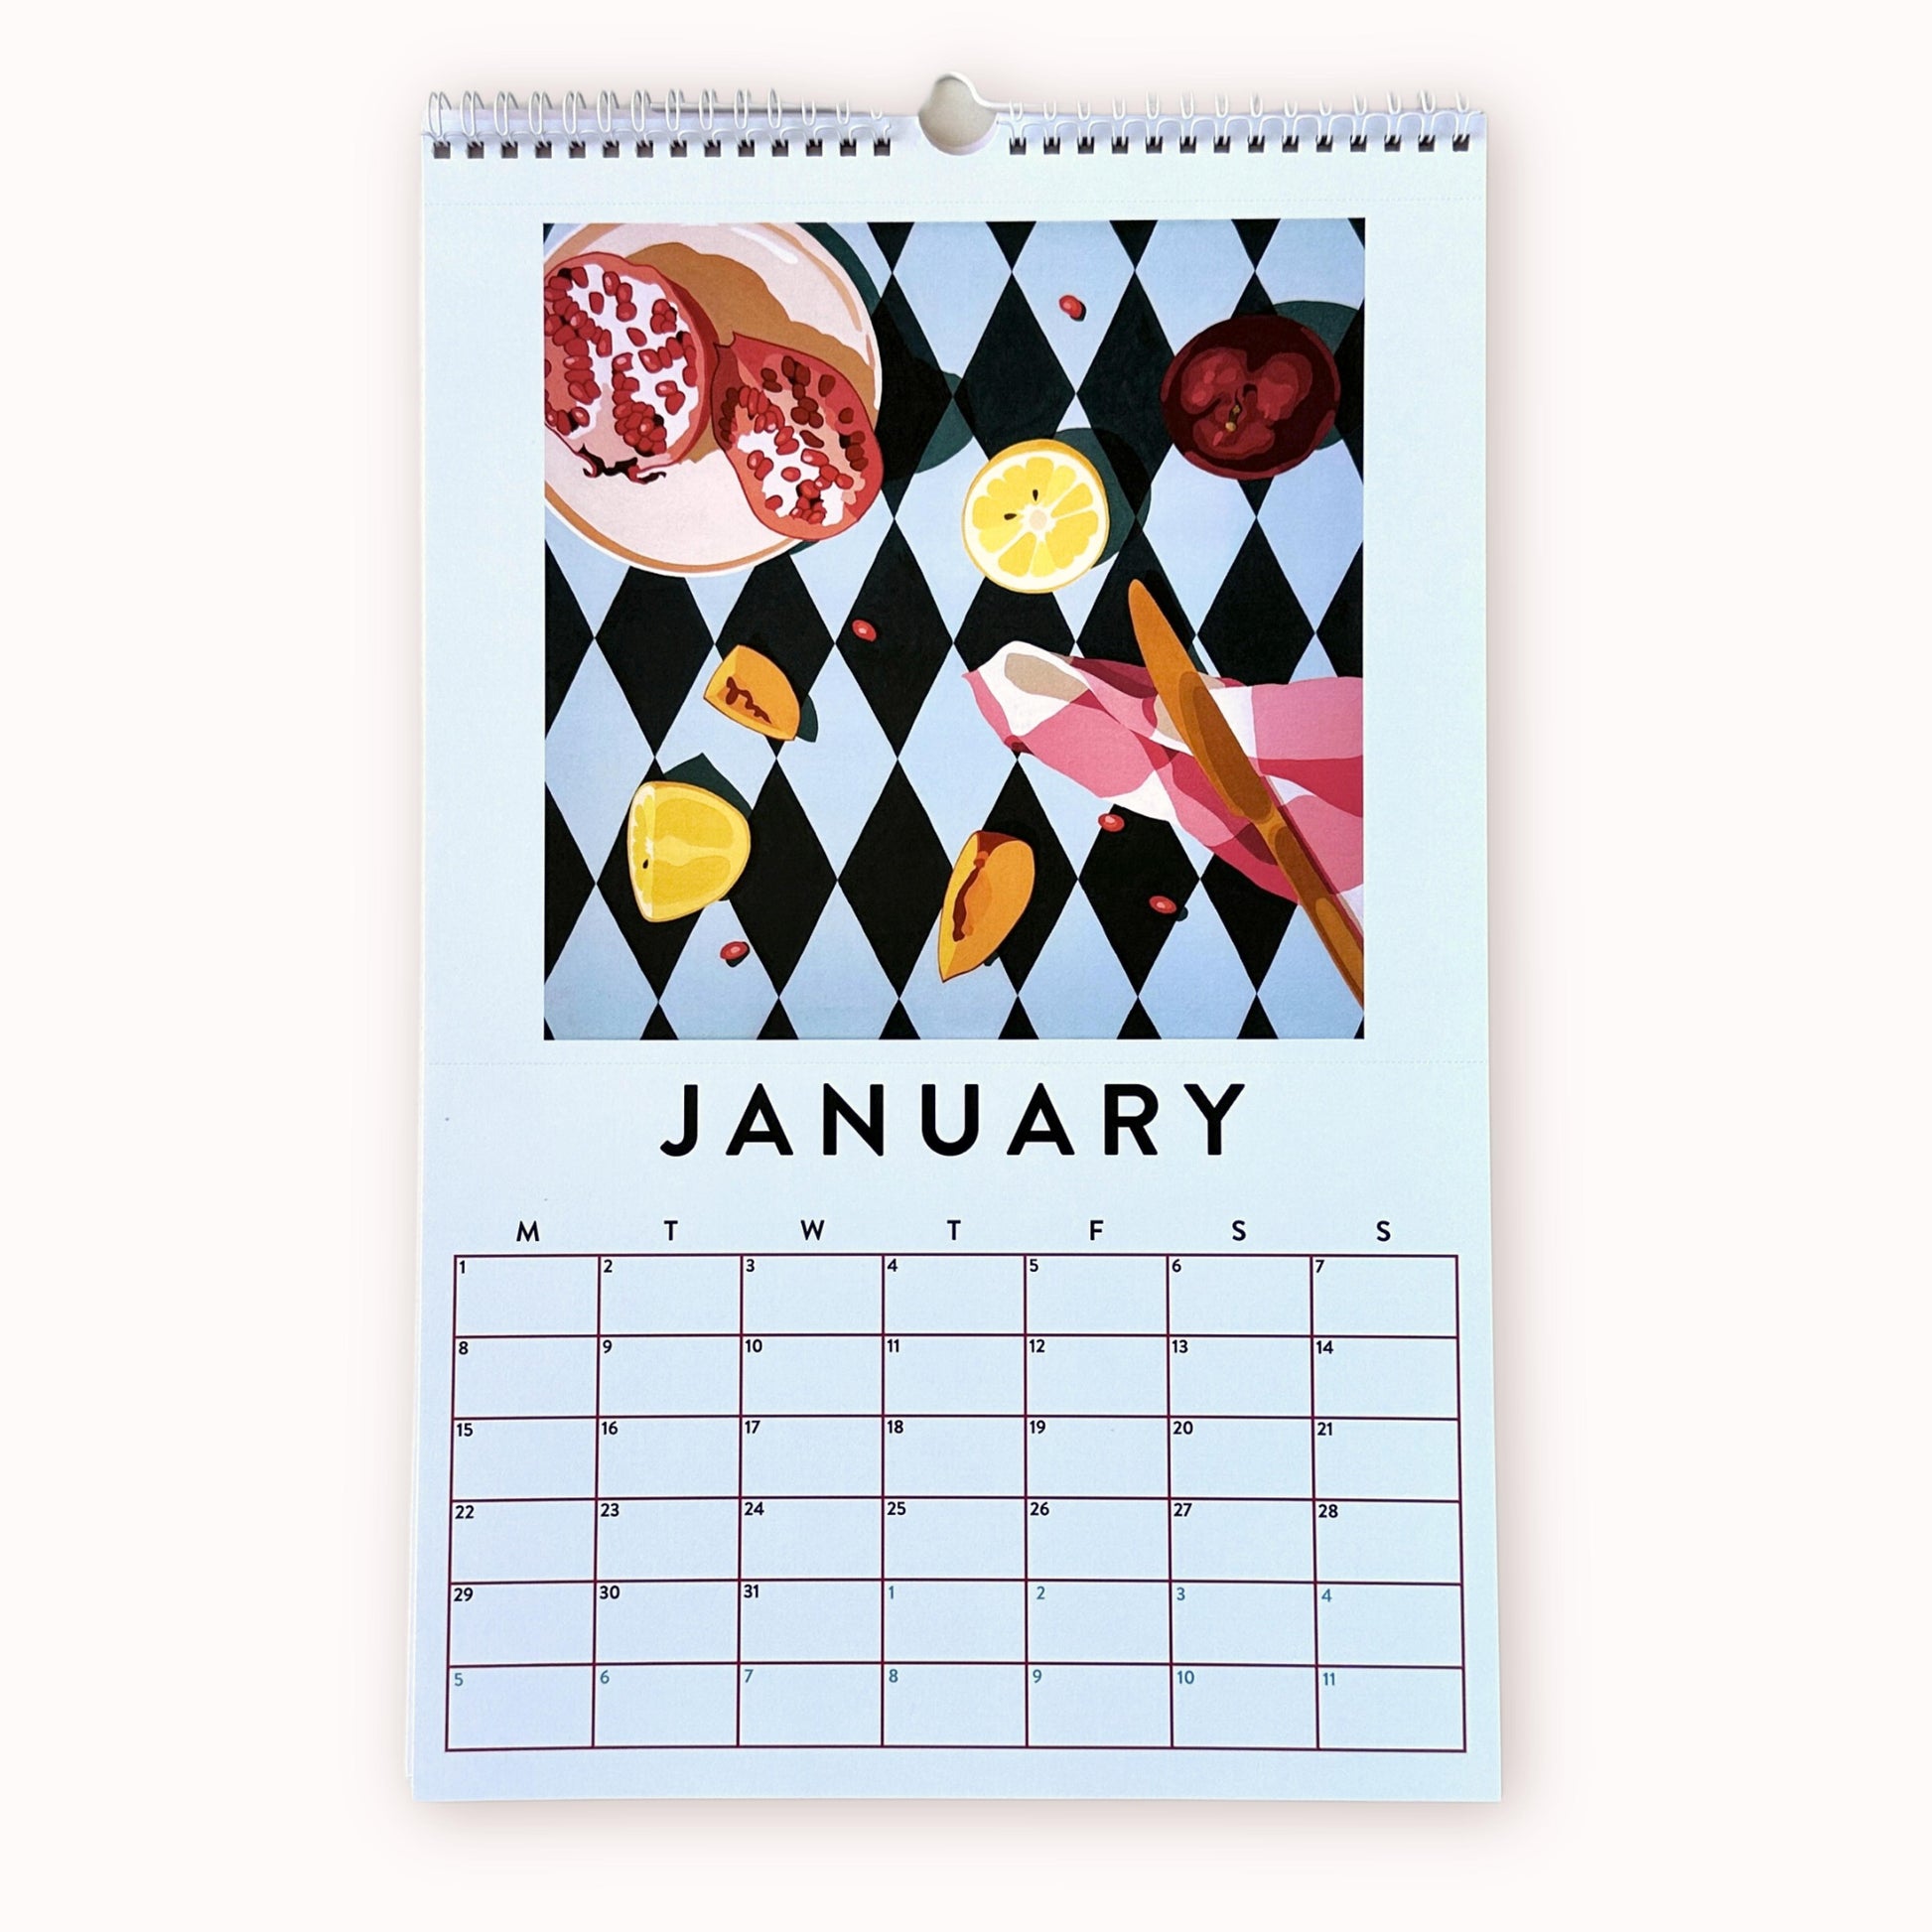 2024 art wall calendar in A3 size for the month of January, featuring a still life oil painting of fruits such as pomegranates with seeds, plum, lemon slices and peach slices, and a chequered tea towel with a knife on a light blue and dark blue harlequin patterned background